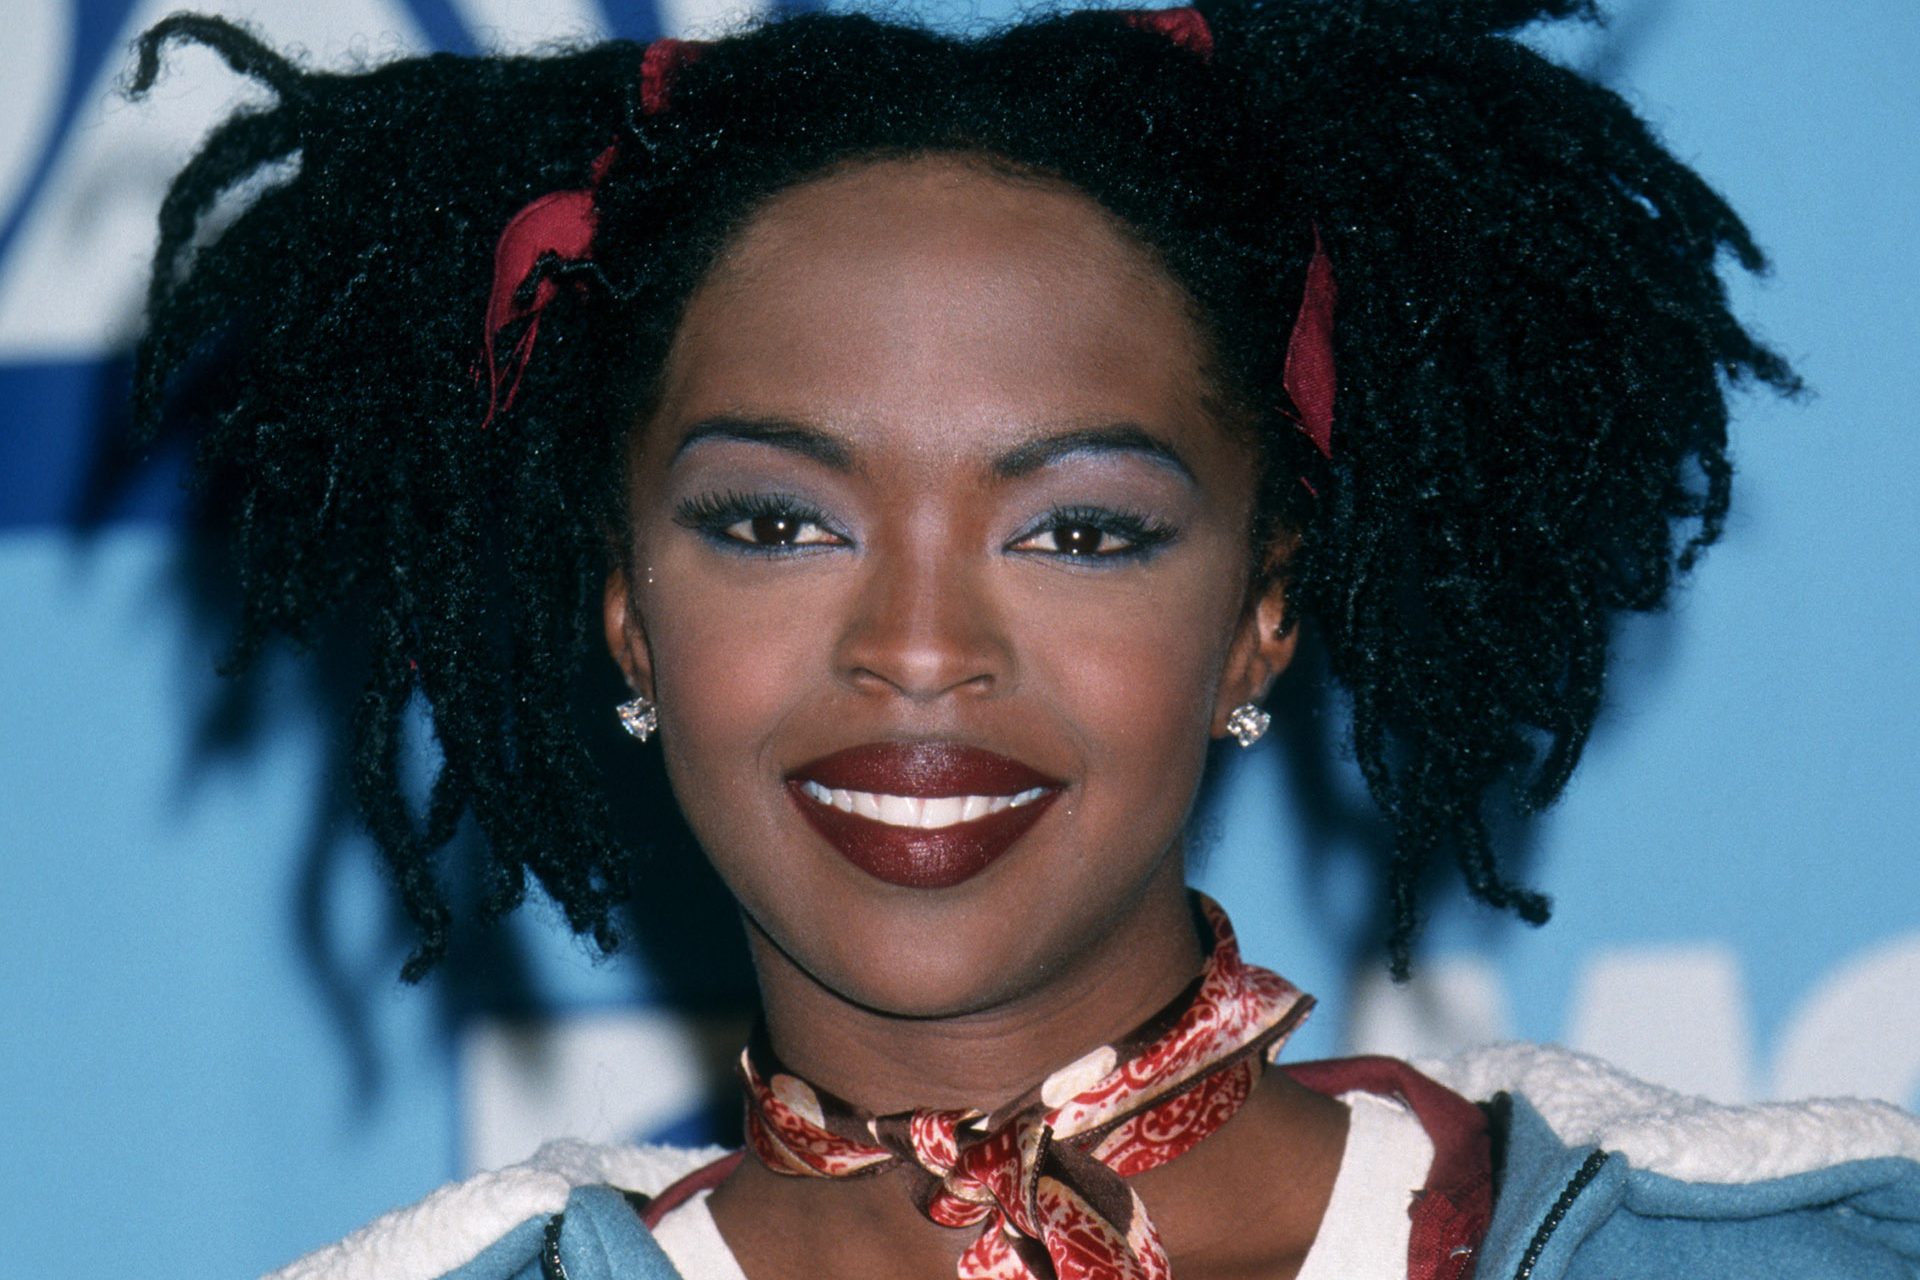 <p>But long before all this, going back to 1997, solo success and global recognition called on Lauryn Hill with her debut album 'The Miseducation of Lauryn Hill', released on August 25, 1998.</p>